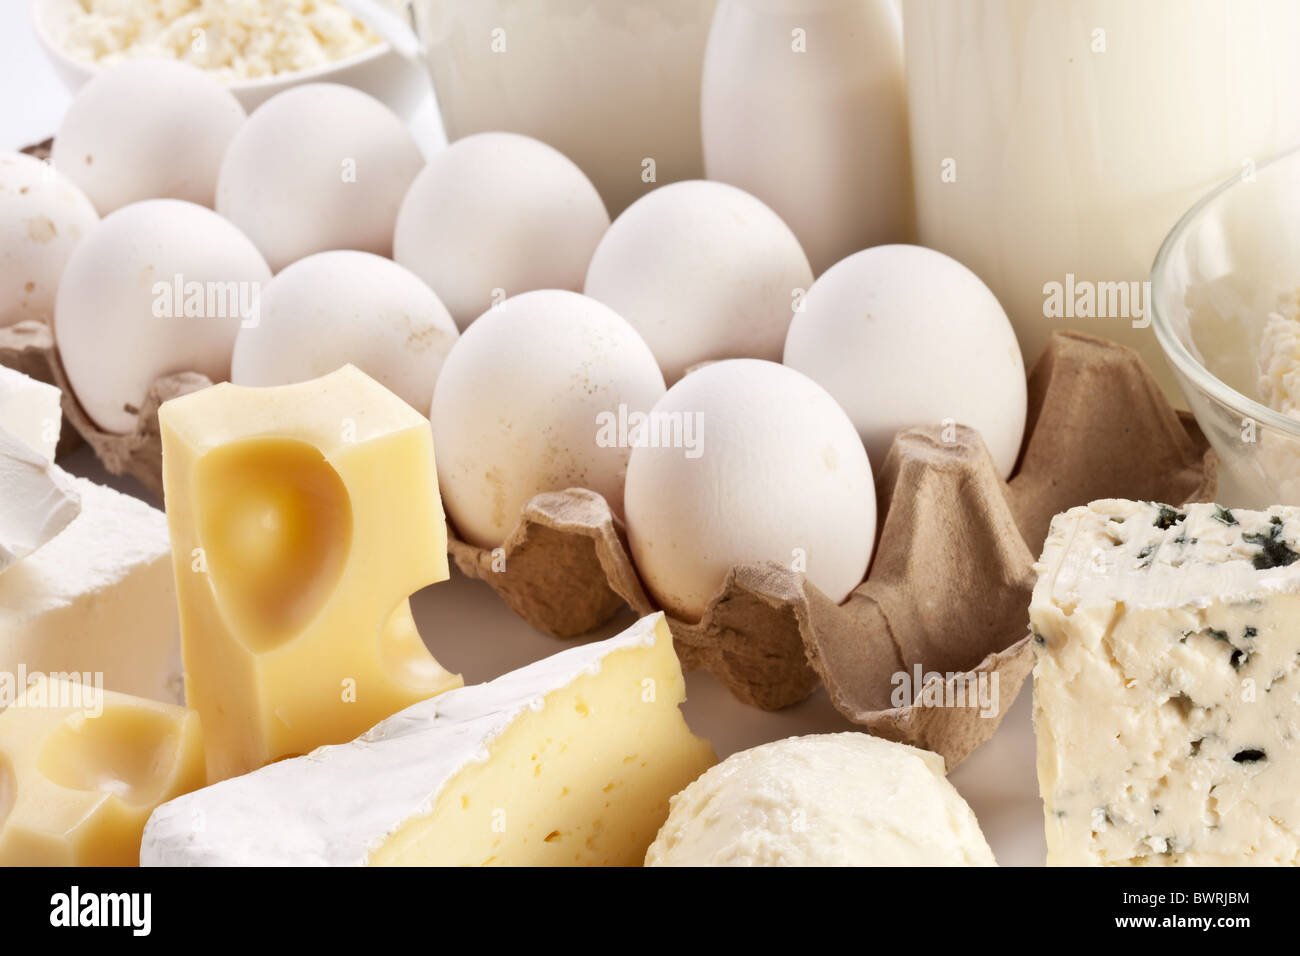 Protein products: cheese, cream, milk, eggs. On a white background. Stock Photo